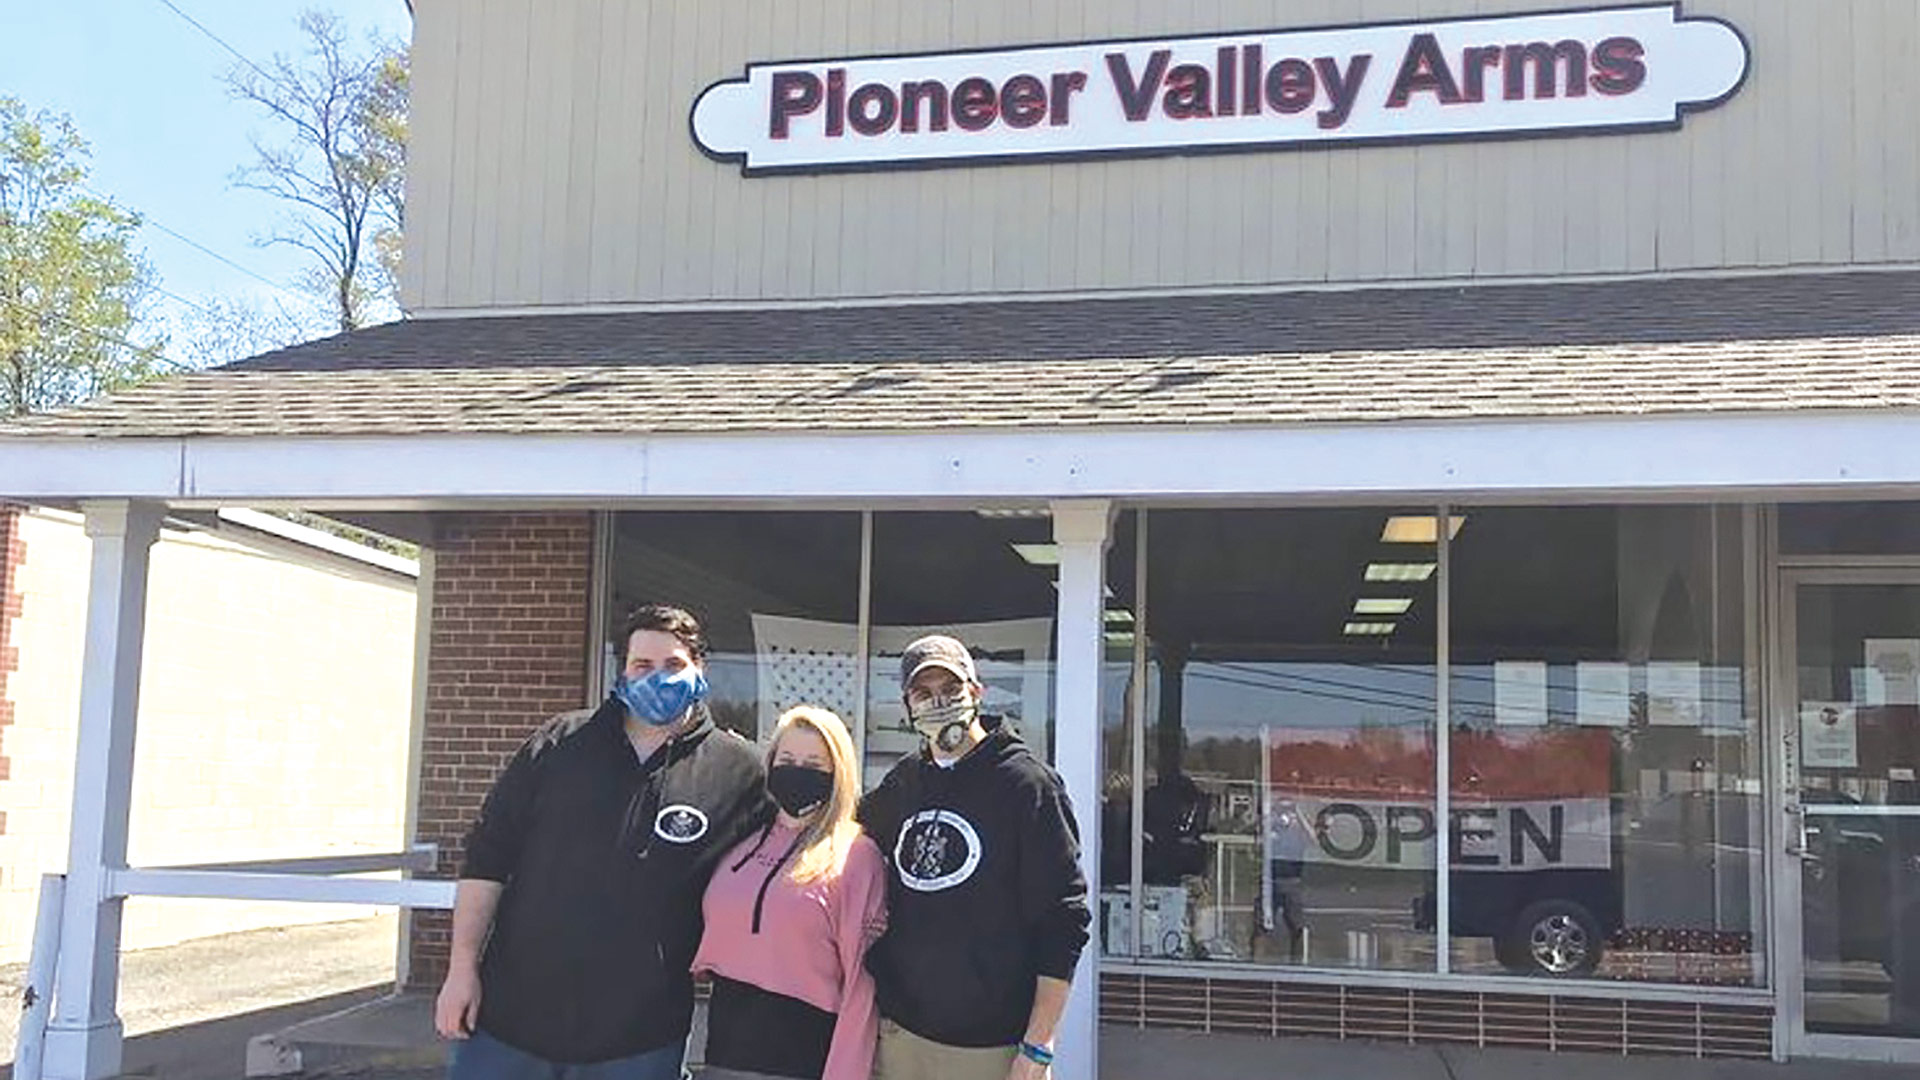 From left, Michael Meunier, owner Kendall Knapik, and Orpheus Barrows from Pioneer Valley Arms.